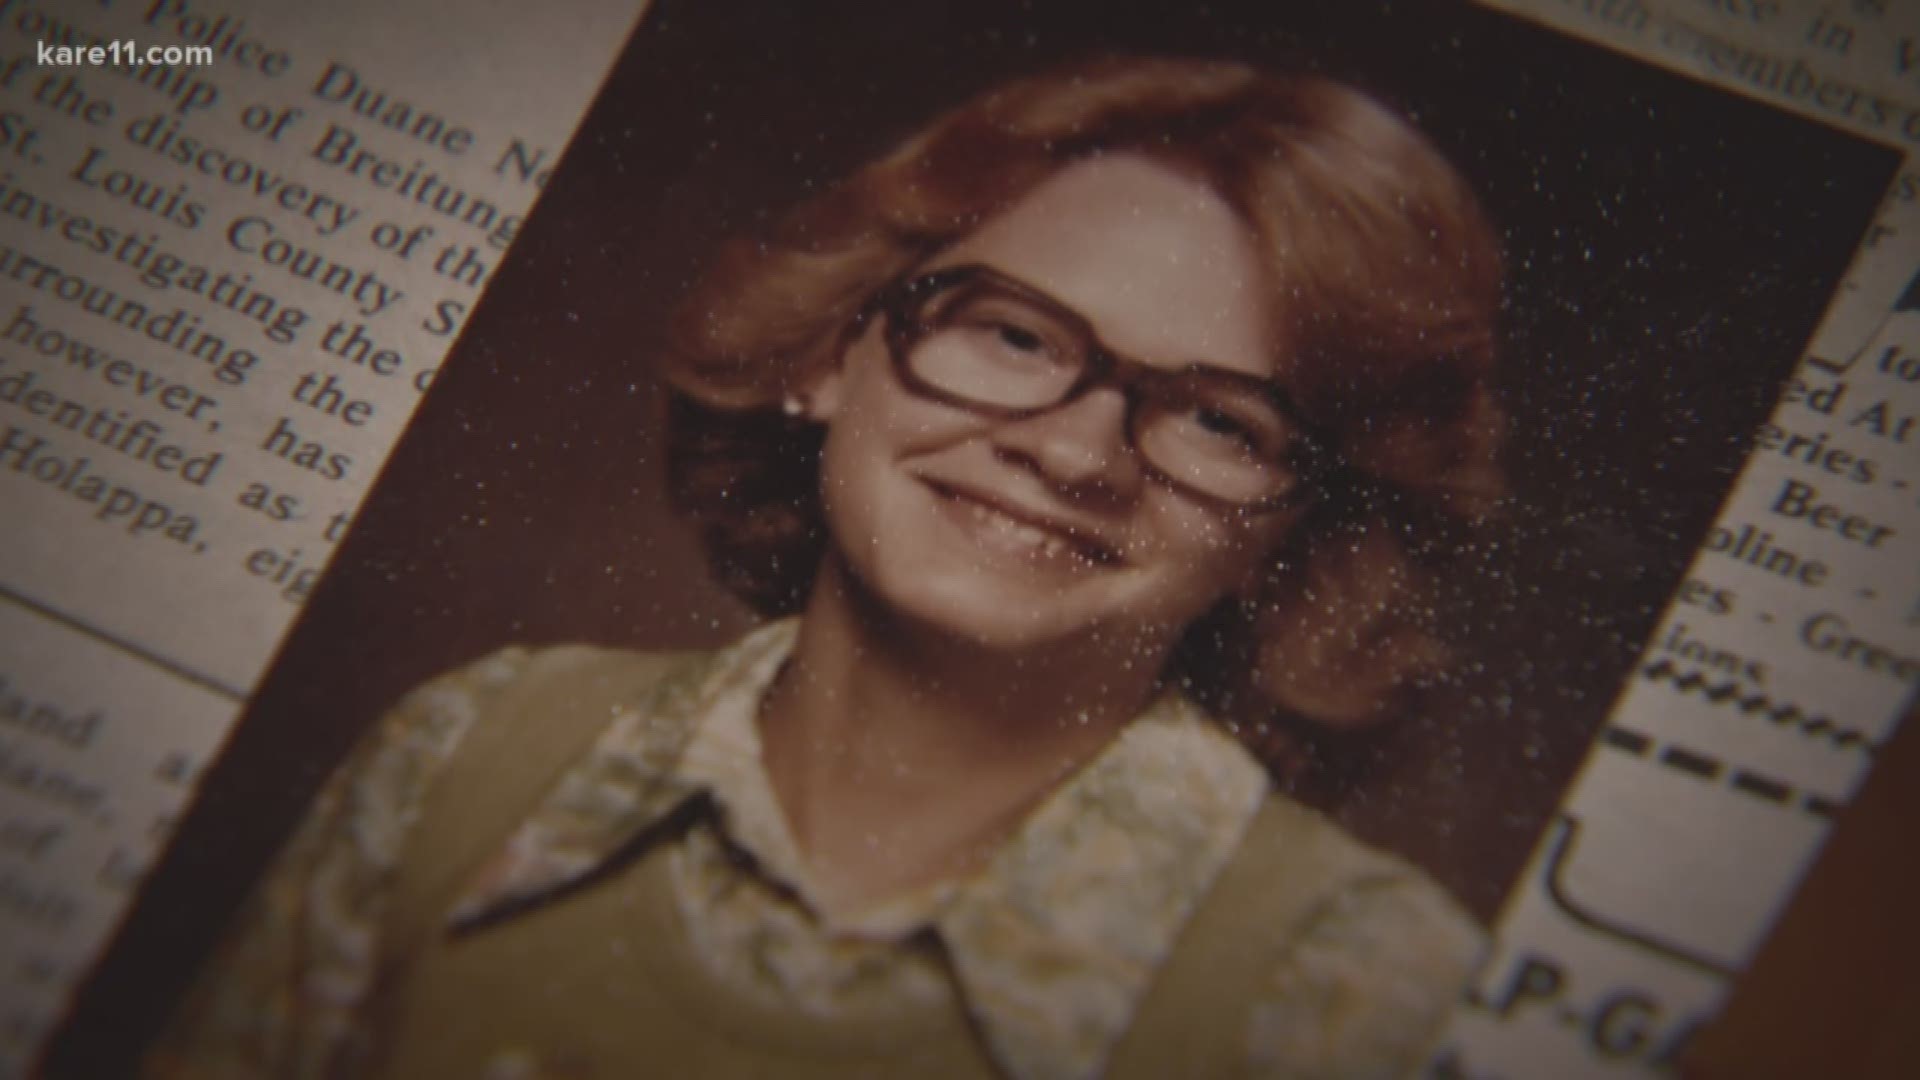 For the first time in nearly four decades, investigators are taking a second look at the 1979 death of Theresa Holappa.